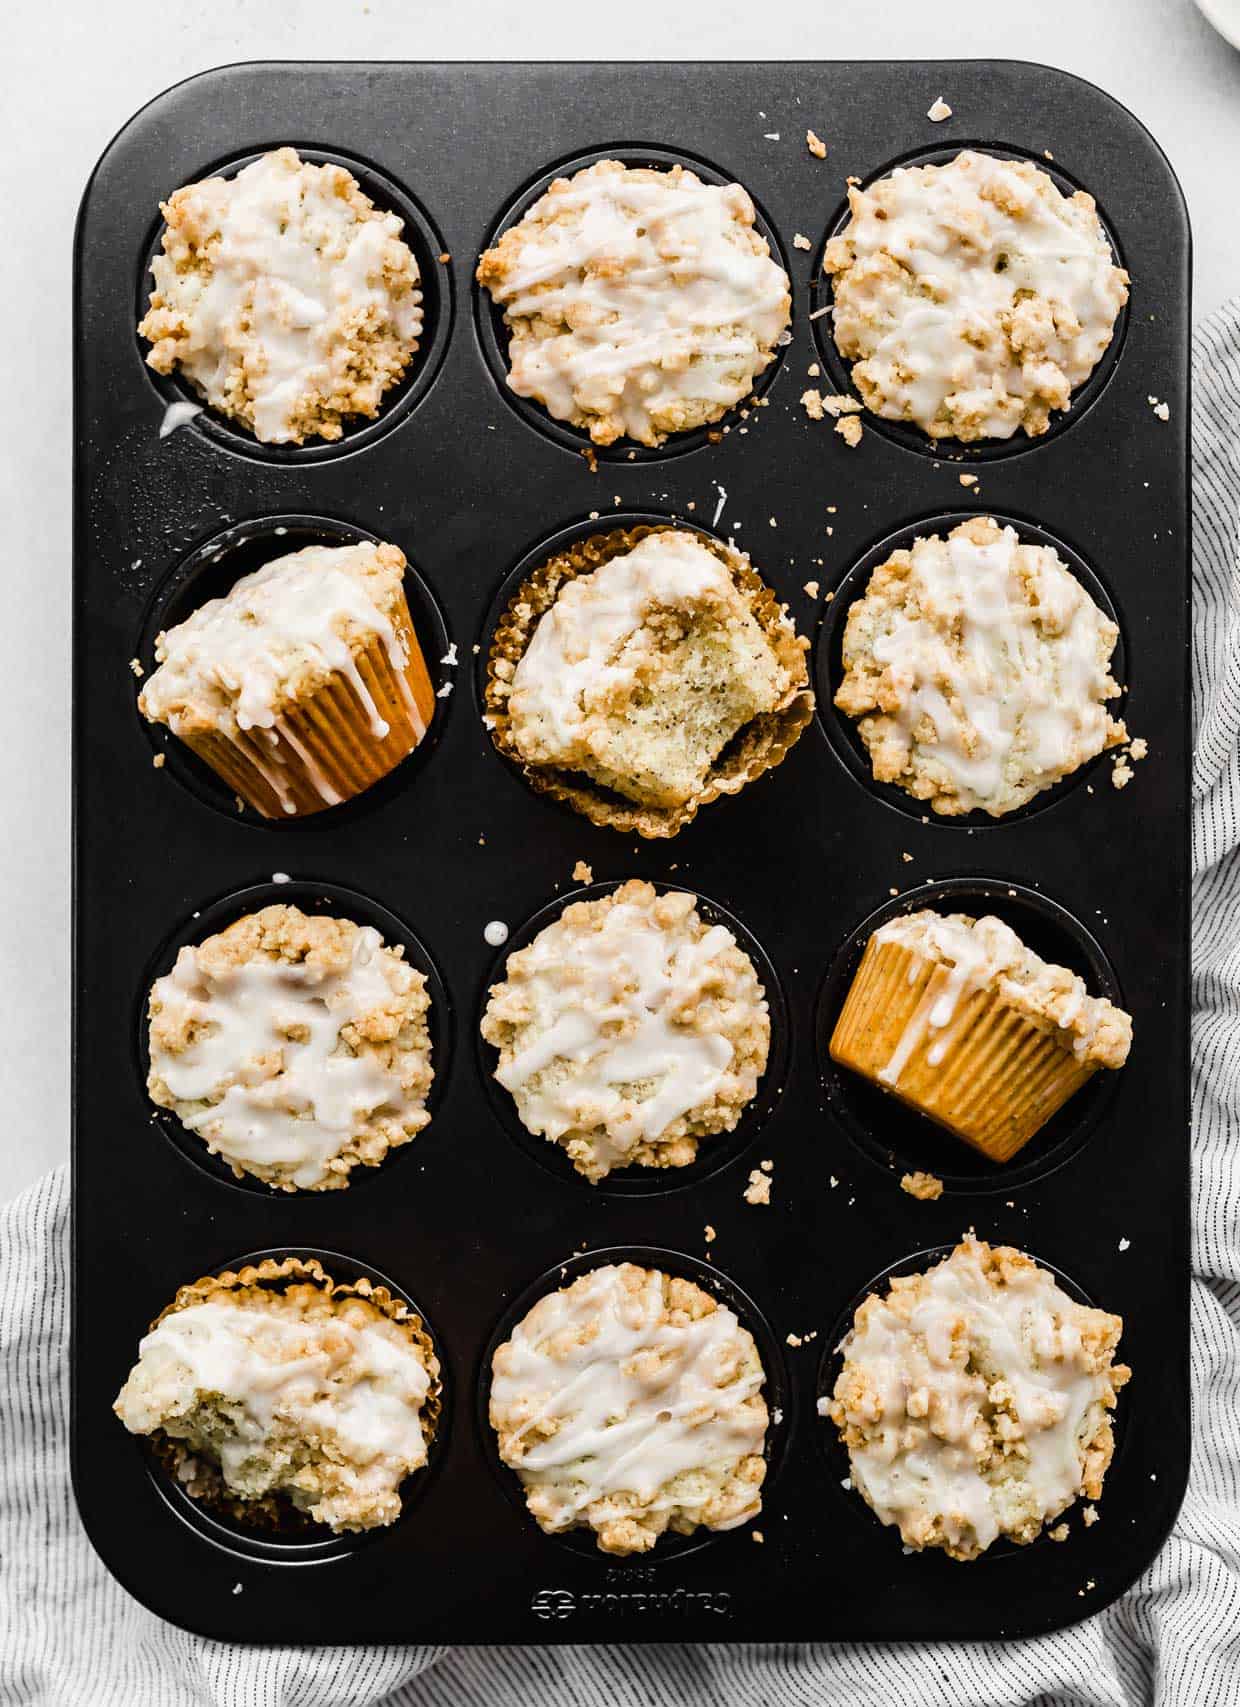 A muffin tin with baked Lemon Poppy Seed Muffins with a crumb topping and glaze.